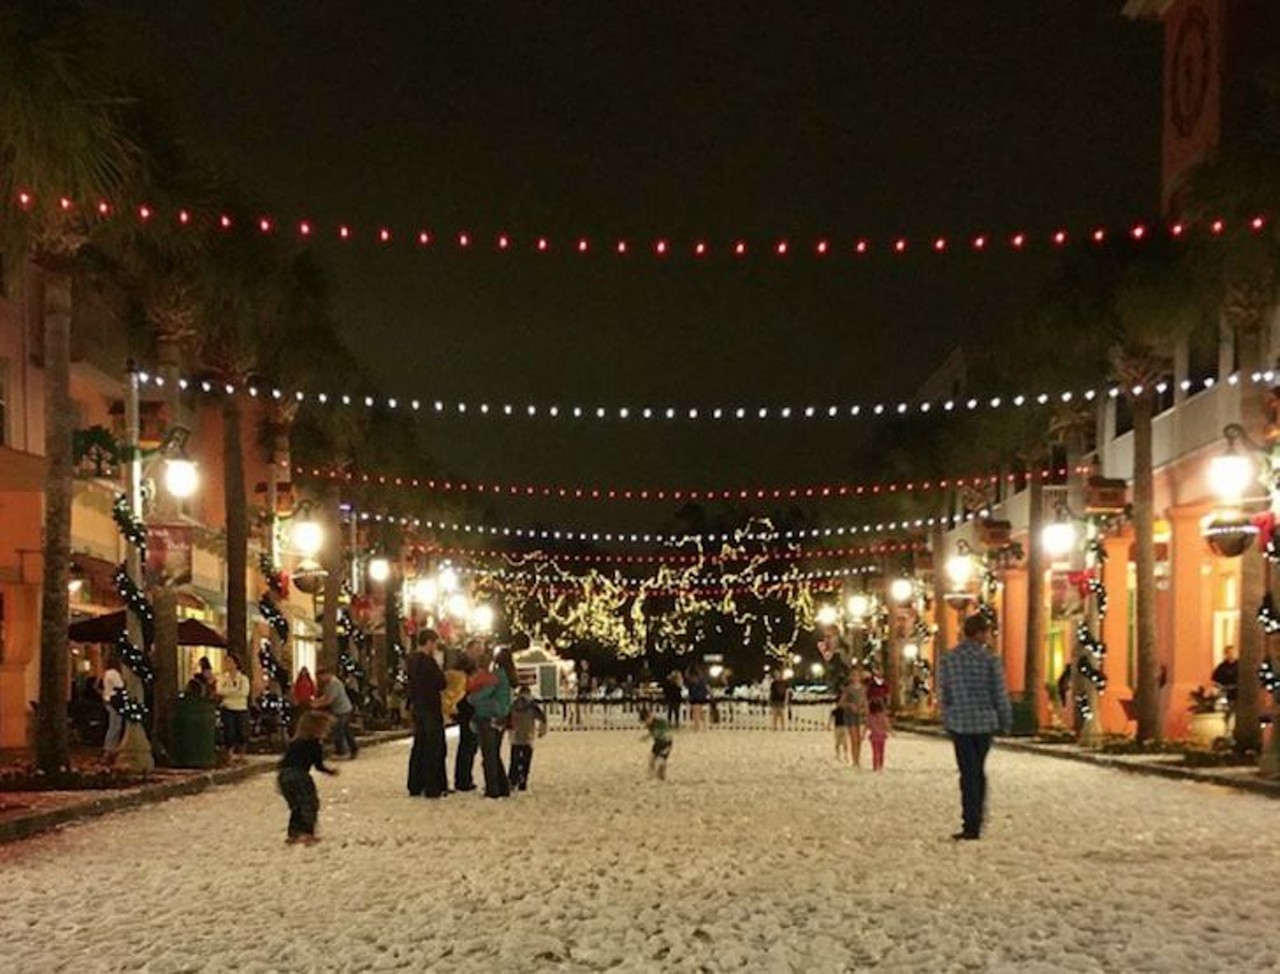 Now Snowing Celebration
701 Front St., Celebration 
November 25 - December 31, 2017
Snow&#146;s-a-fallin&#146; in Celebration and it&#146;s just begging to be basked in. It&#146;s not often that Floridians get to enjoy snow in any fashion, so get your snow angels in while you can.
Photo via paulajschmitt/Instagram